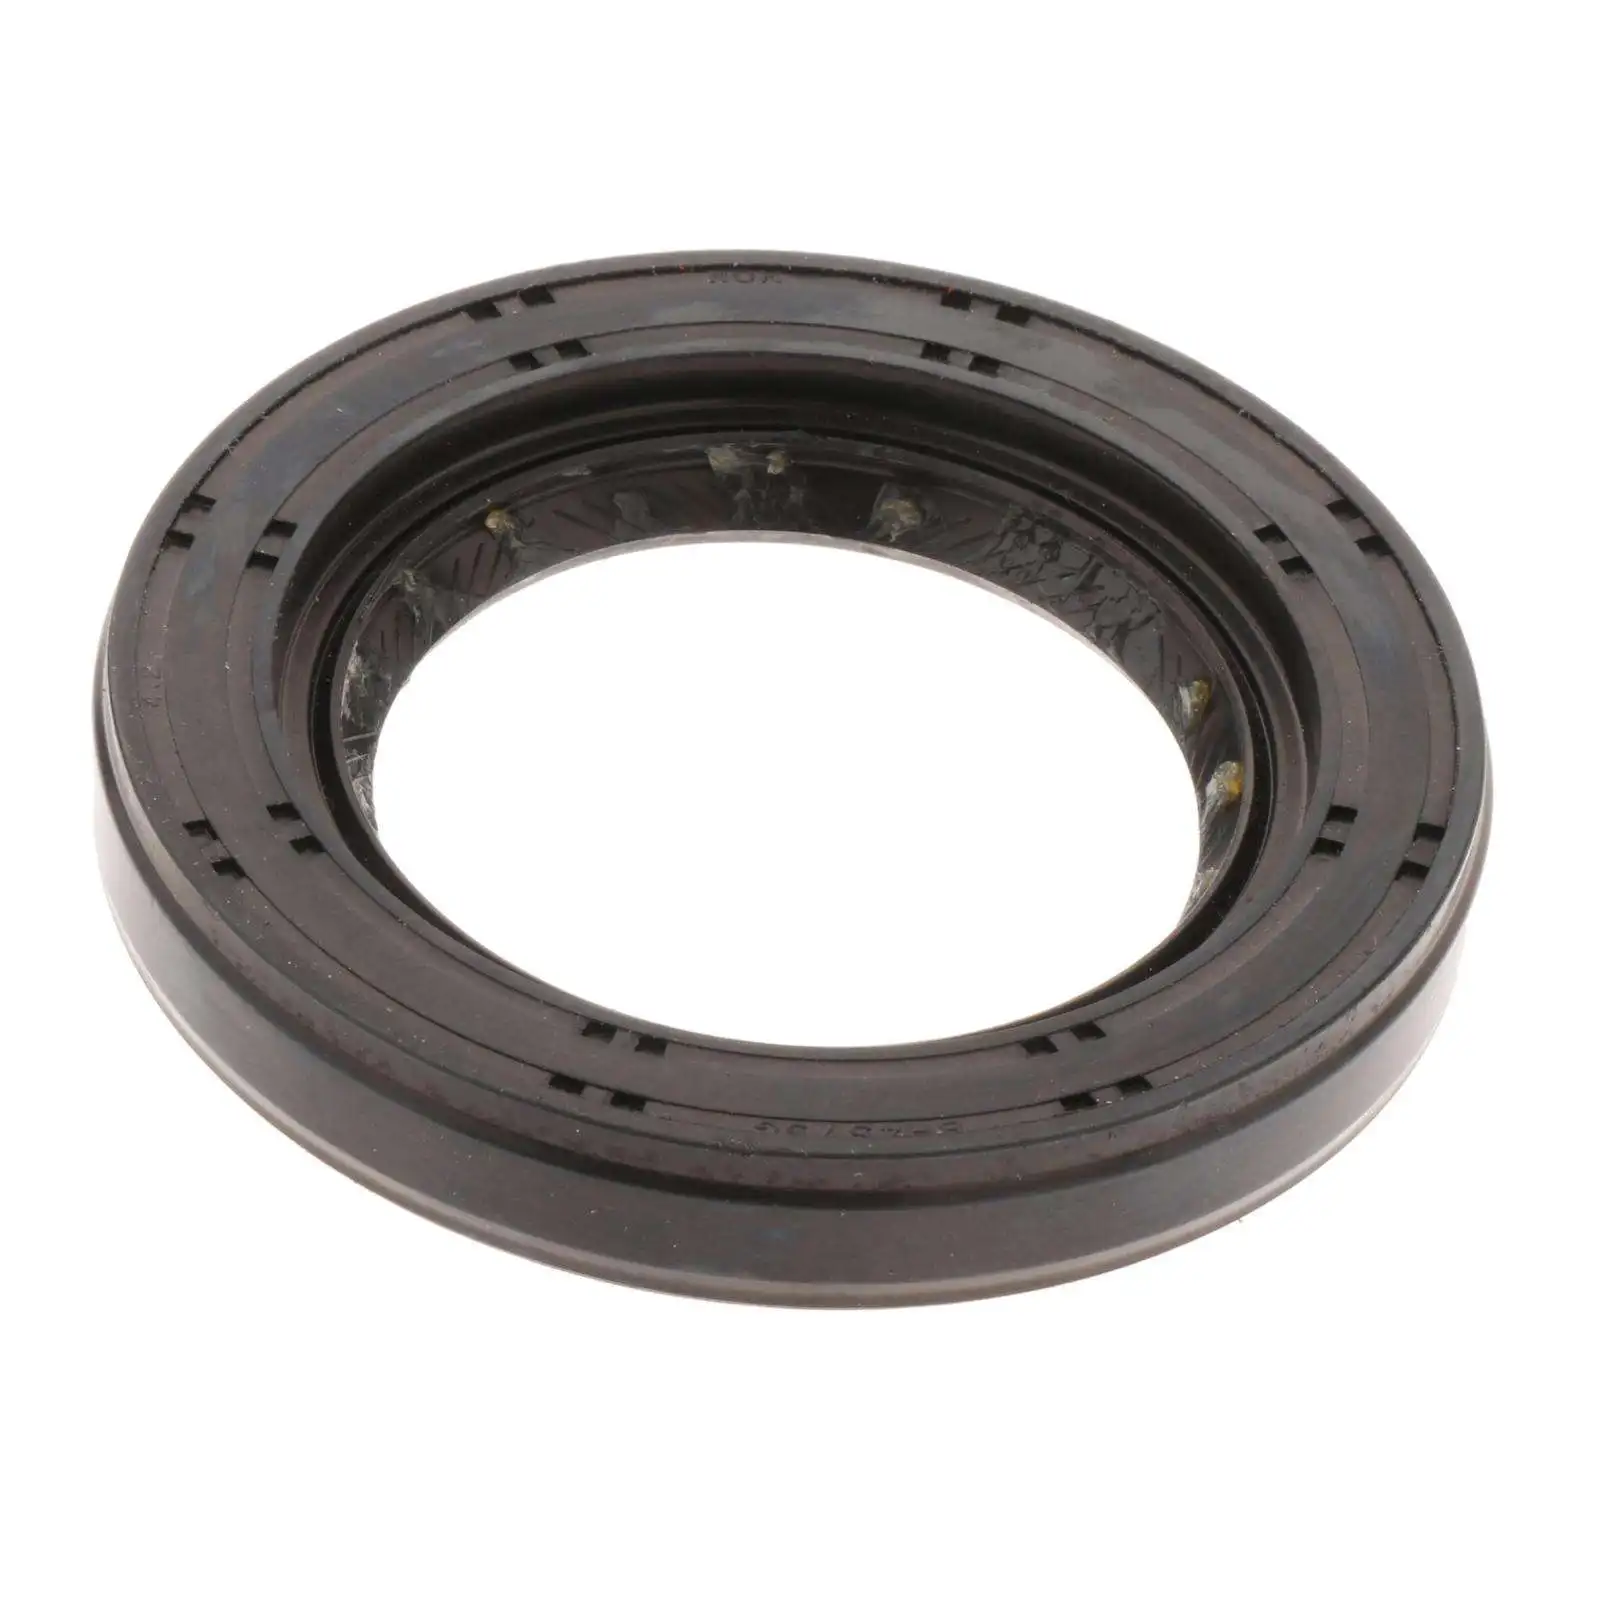 Oil Seal Premium Easy to Install Durable for Skoda Fit for 09G Transmission Accessories High Performance Direct Replaces